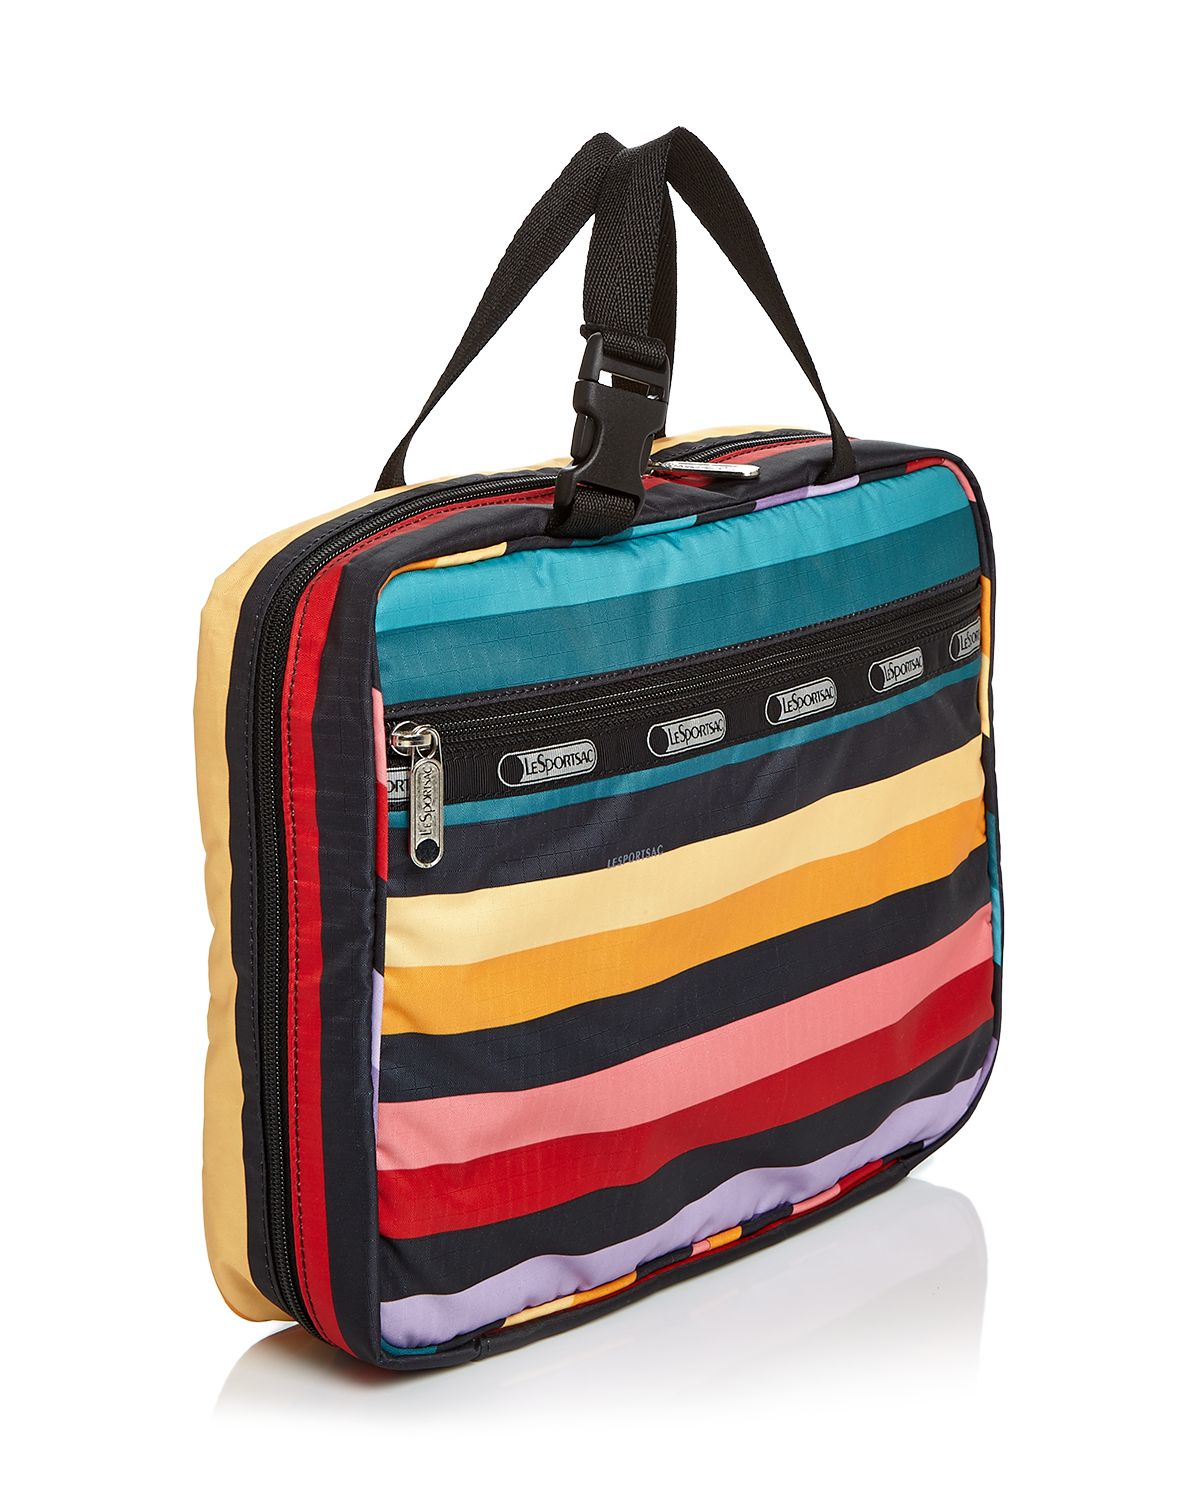 Lyst - LeSportsac Deluxe Travel Cosmetic Case